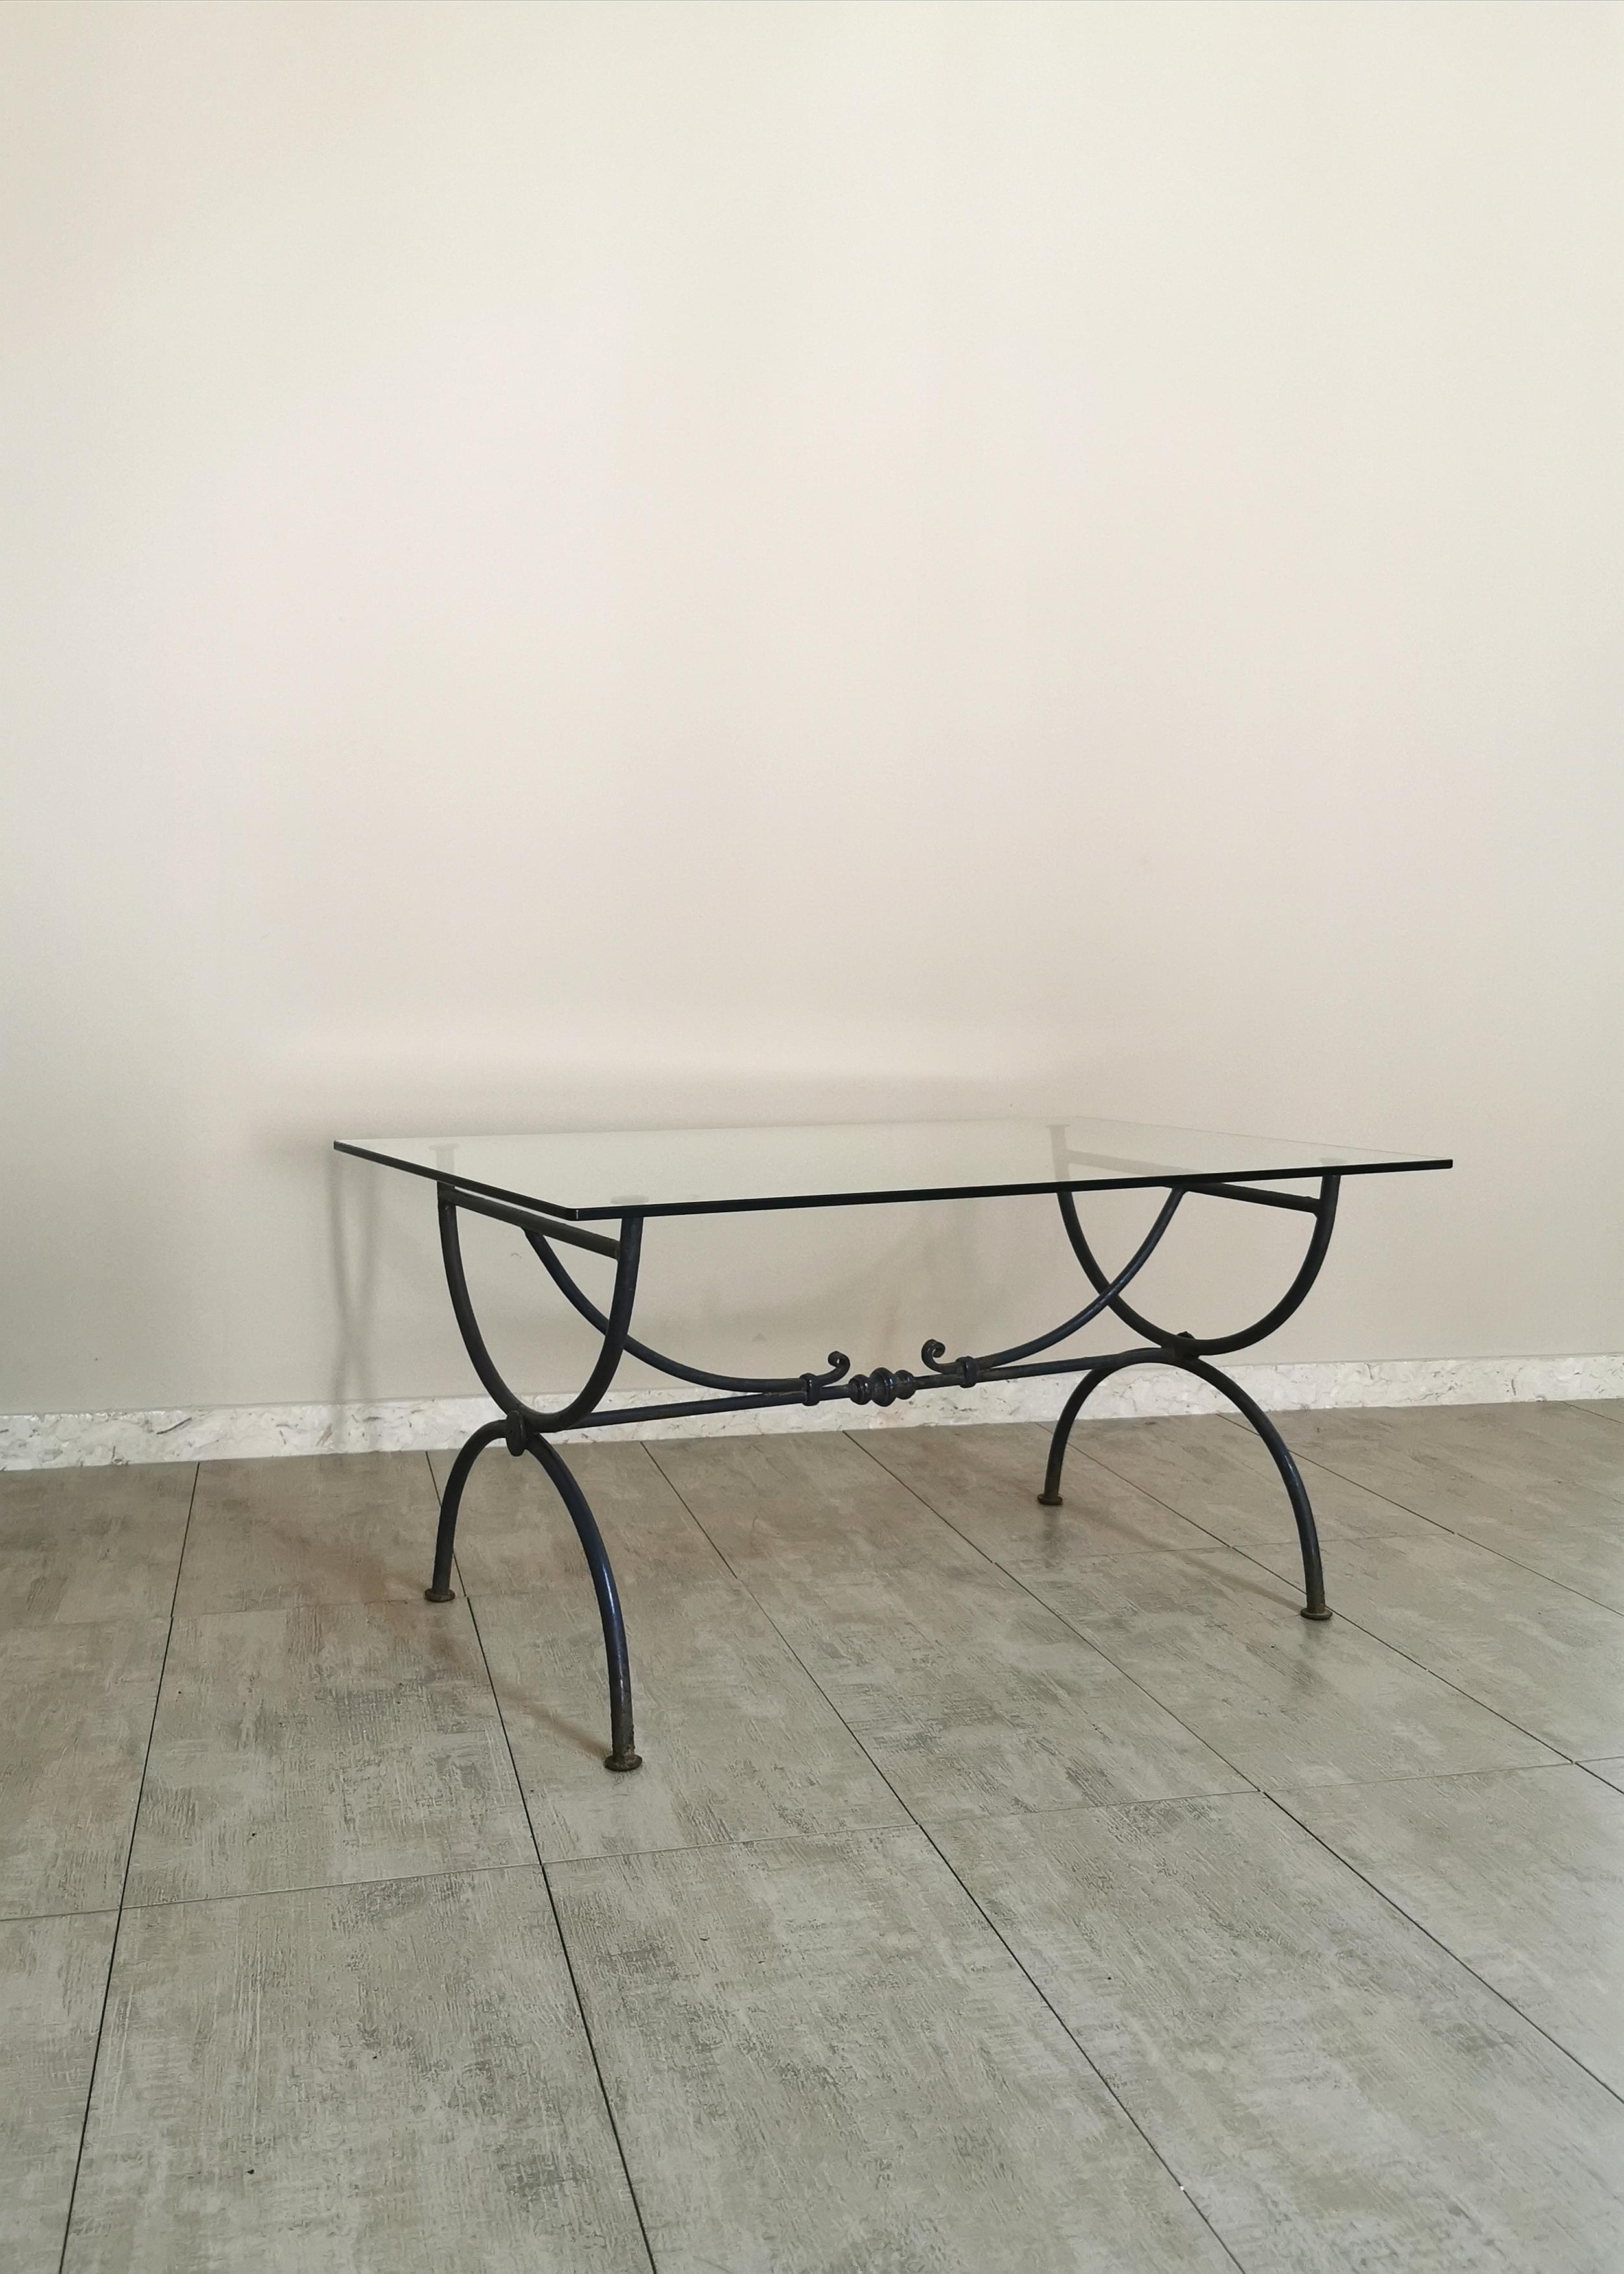 Large late 20th century iron coffee table with thick rectangular glass top. Produced in Italy. Its pleasant line allows it to be perfectly located in outdoor and indoor environments.